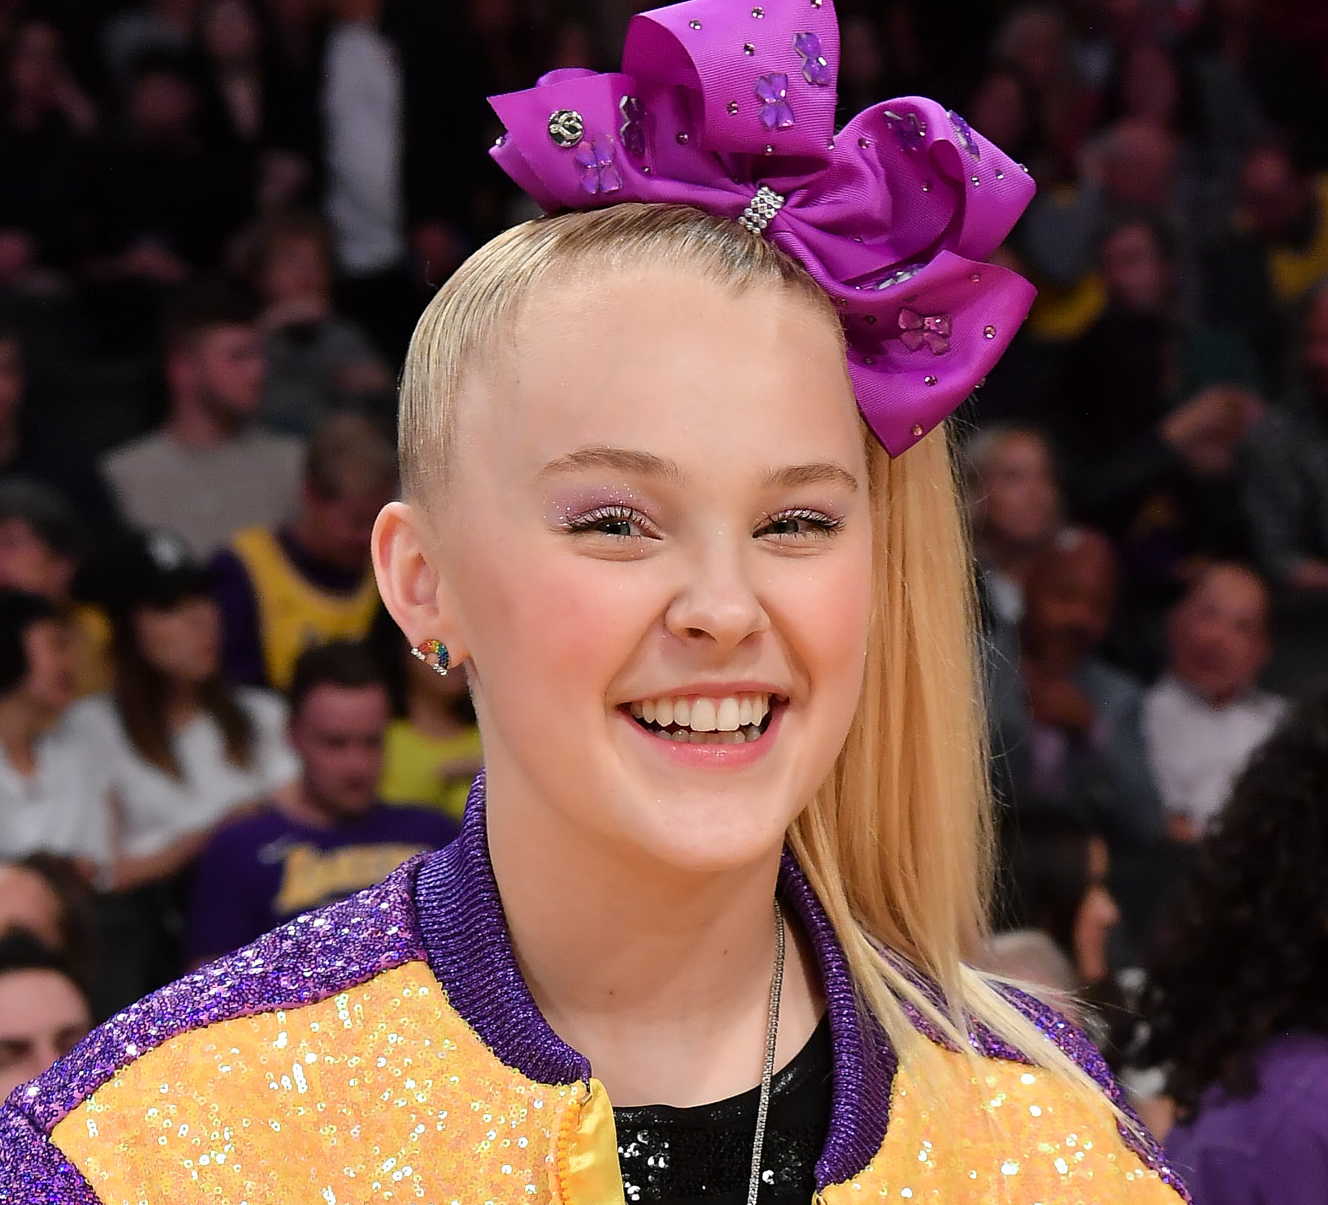 JoJo Siwa - Exclusive Interviews, Pictures & More | Entertainment Tonight